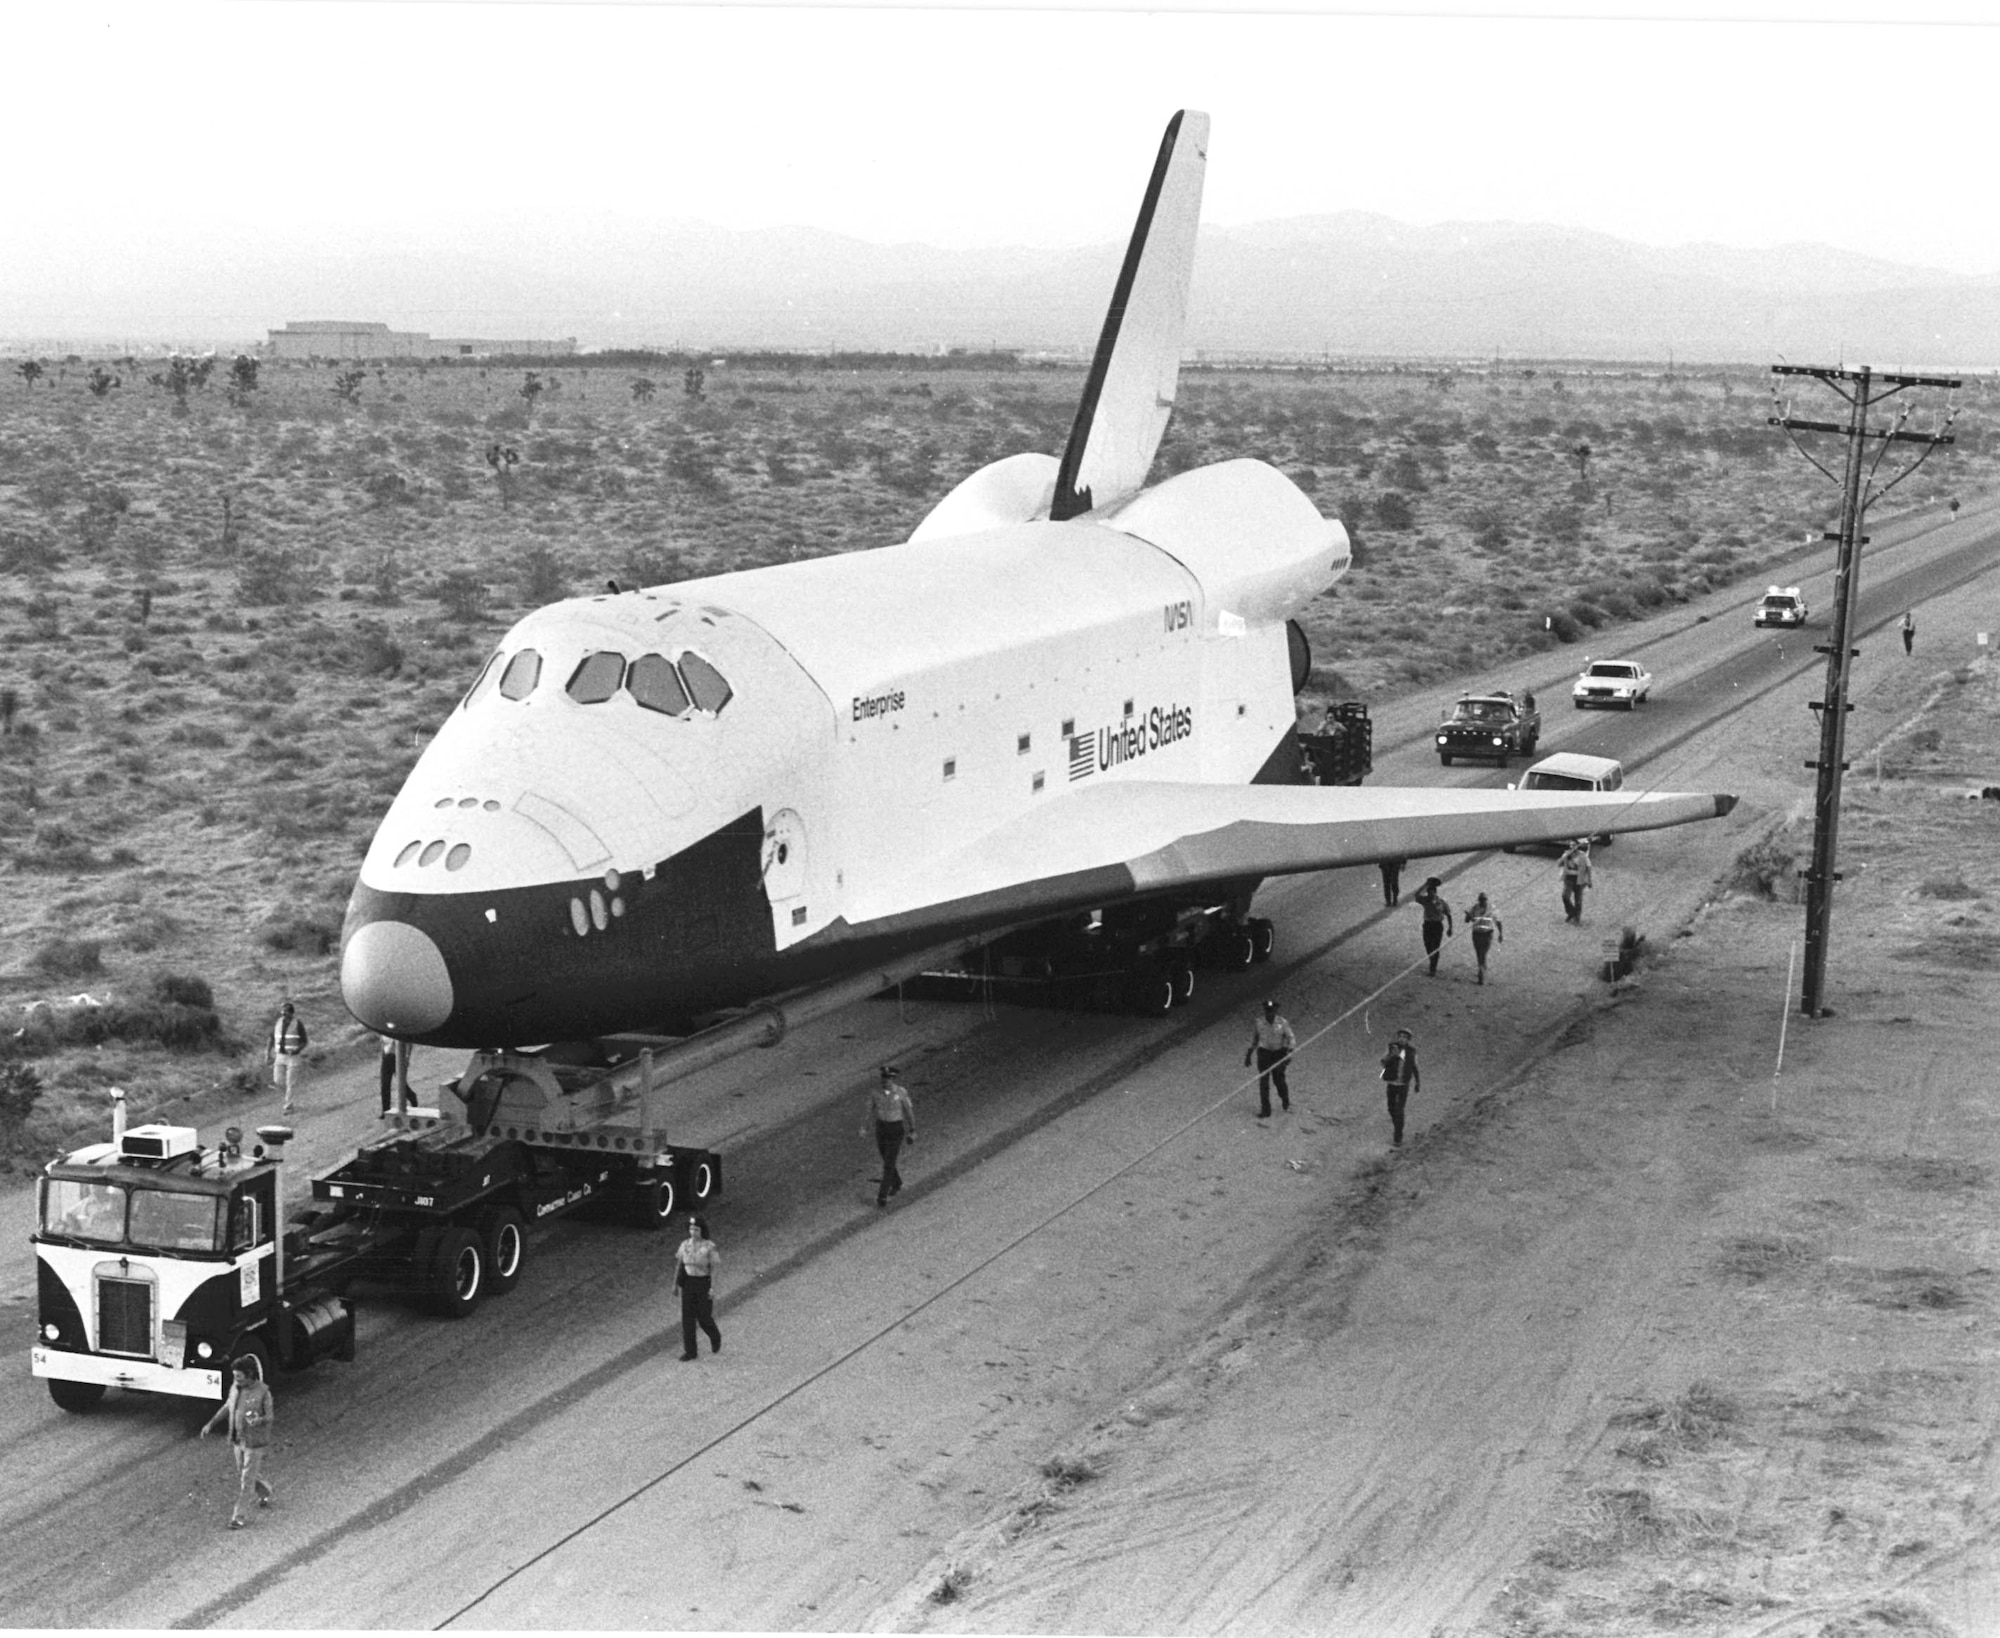 The first Space Shuttle orbiter, Enterprise, arrived at Edwards AFB on January 31, 1977.  It had been moved via road at 3 mph from Rockwell International’s assembly facility at Palmdale aboard a 90-wheel transporter.  The unpowered version of the Shuttle was housed at Dryden Flight Research Center in preparation for a series of ground, captive- and free-flight tests prior to the space launch program. (Courtesy Photo) 